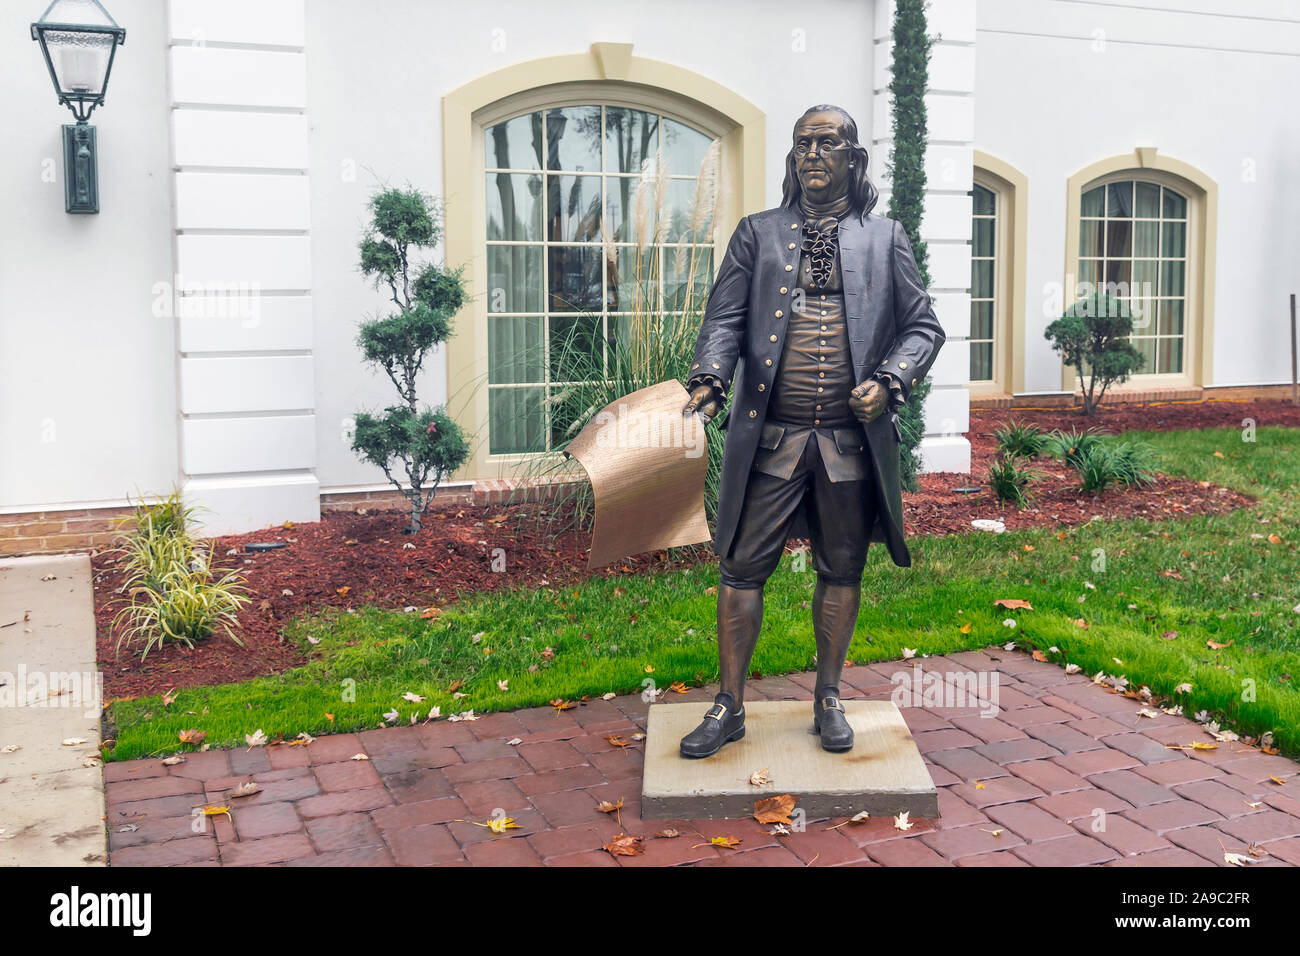 Fathers of the United States Benjamin Franklin, statue in front of a Philadelphia office ,Philadelphia, Pennsylvania, USA Stock Photo